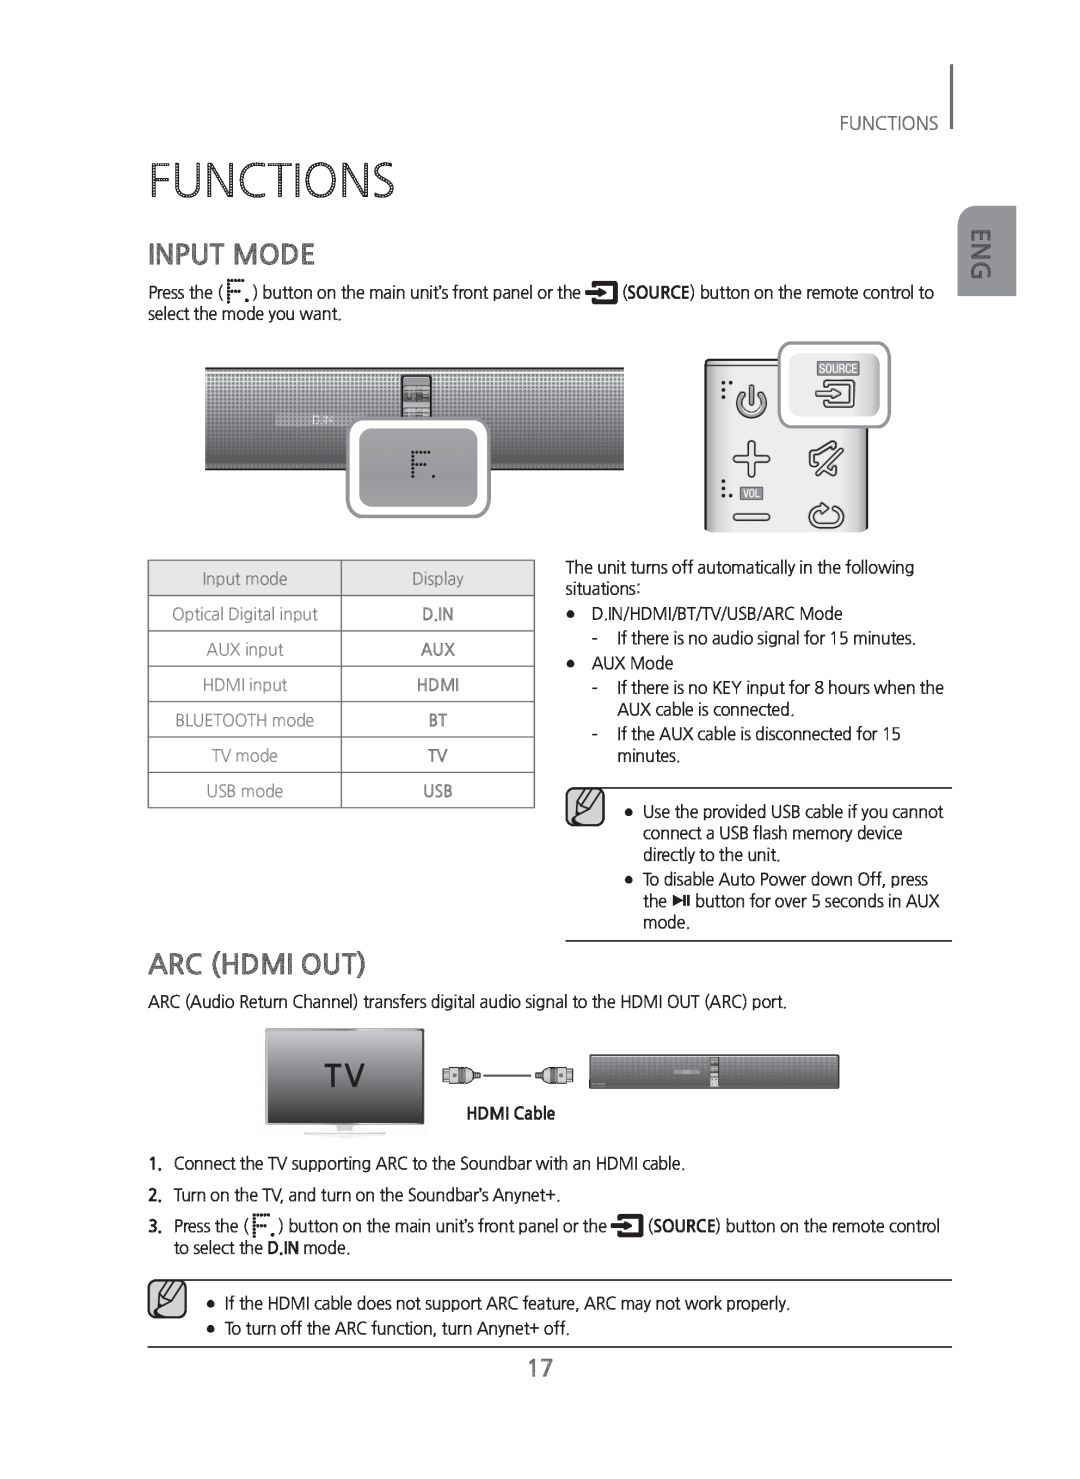 Samsung HWH750 manual Functions, Input Mode, Arc Hdmi Out 